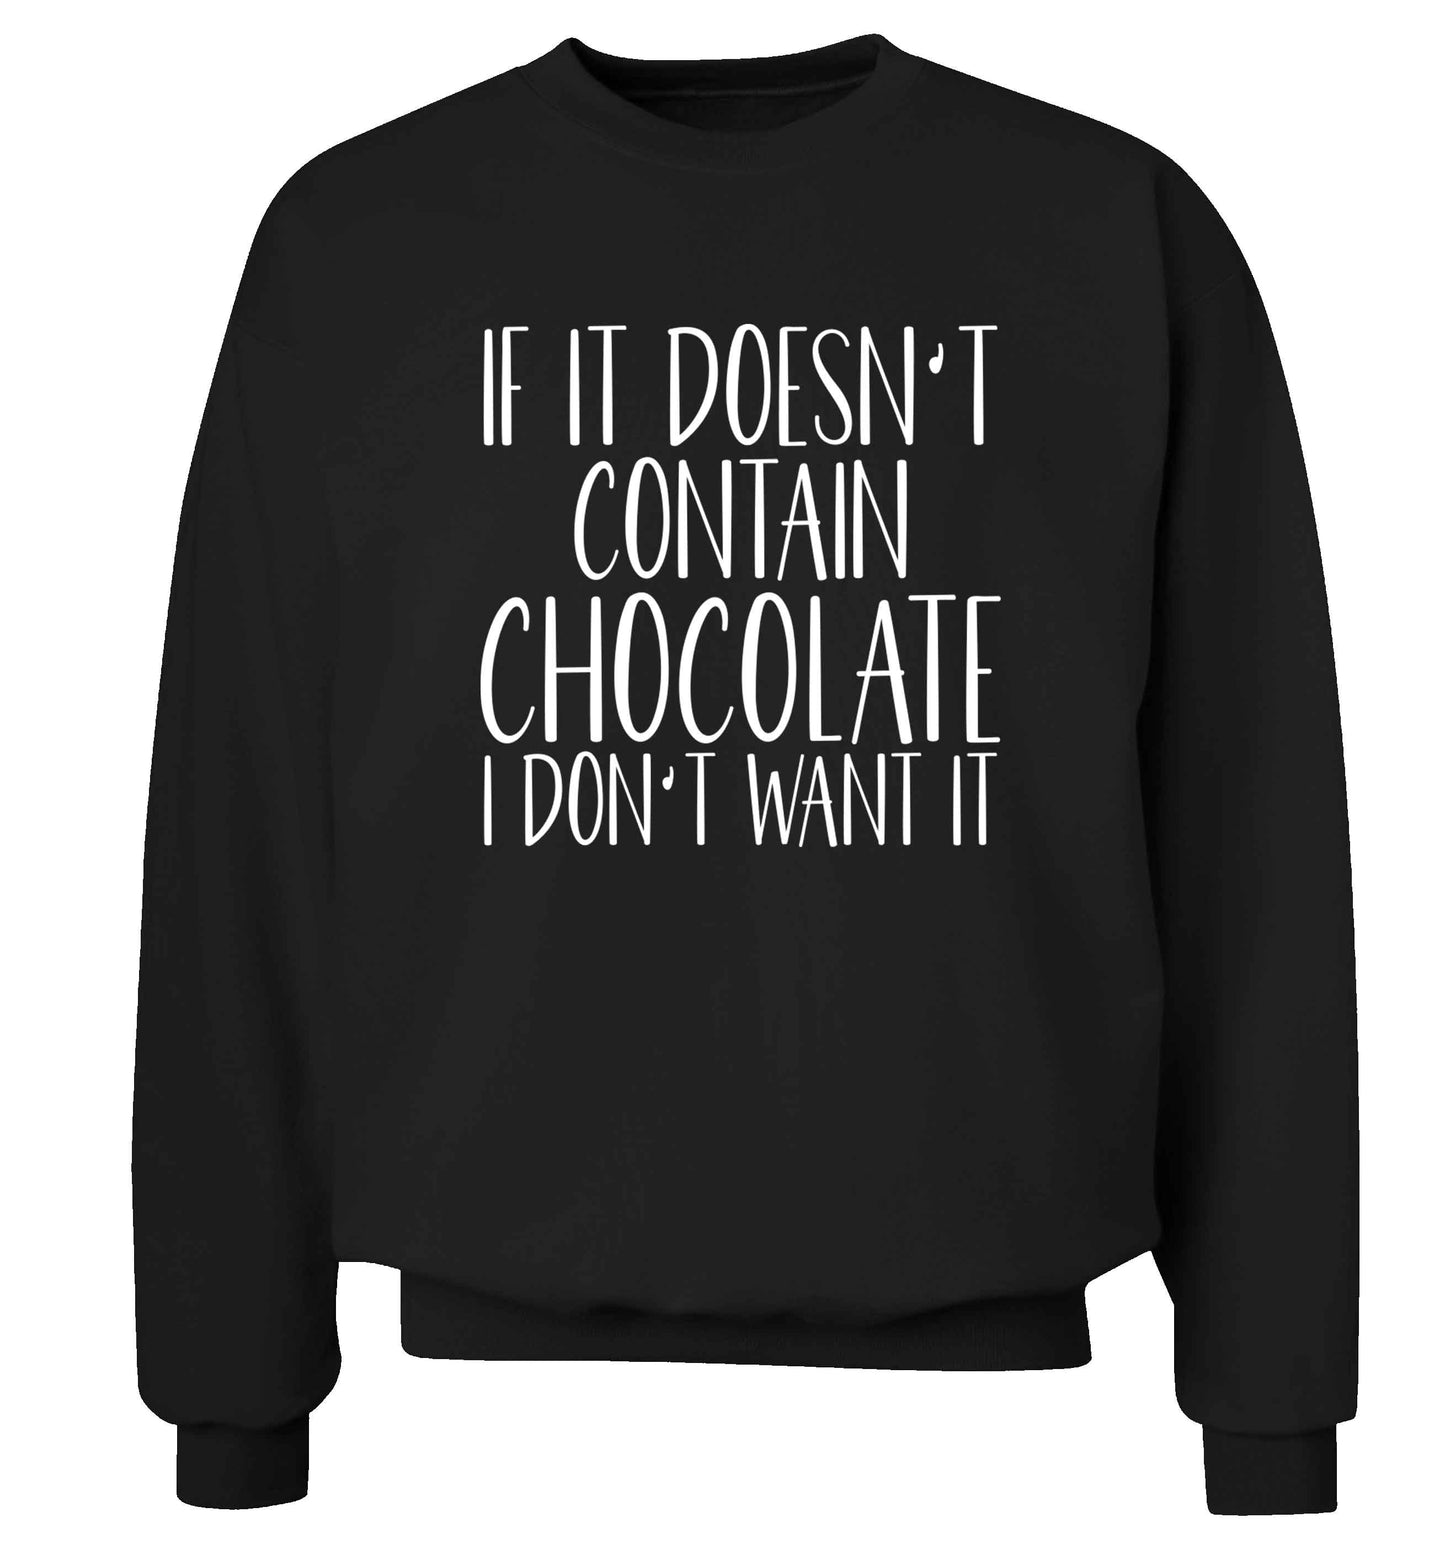 If it doesn't contain chocolate I don't want it adult's unisex black sweater 2XL